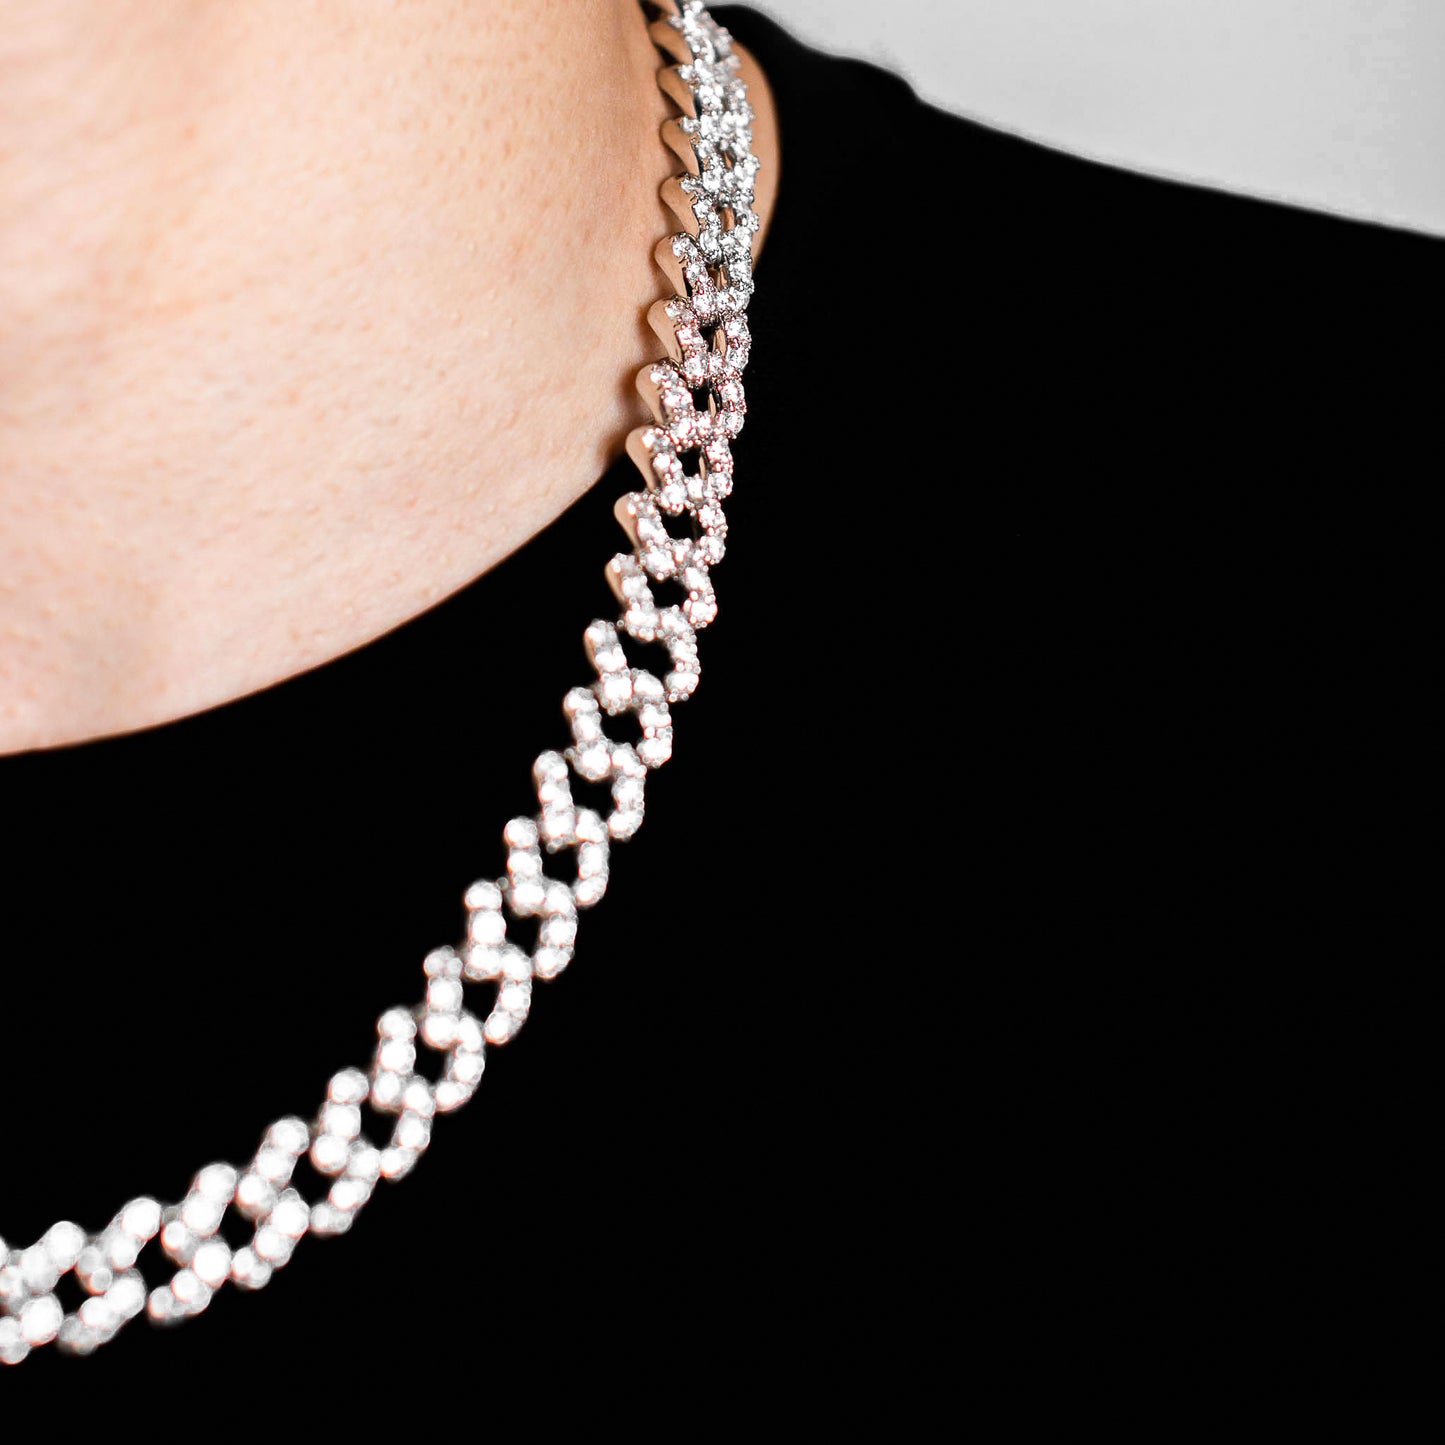 10mm Iced Cuban Link Chain - White Gold